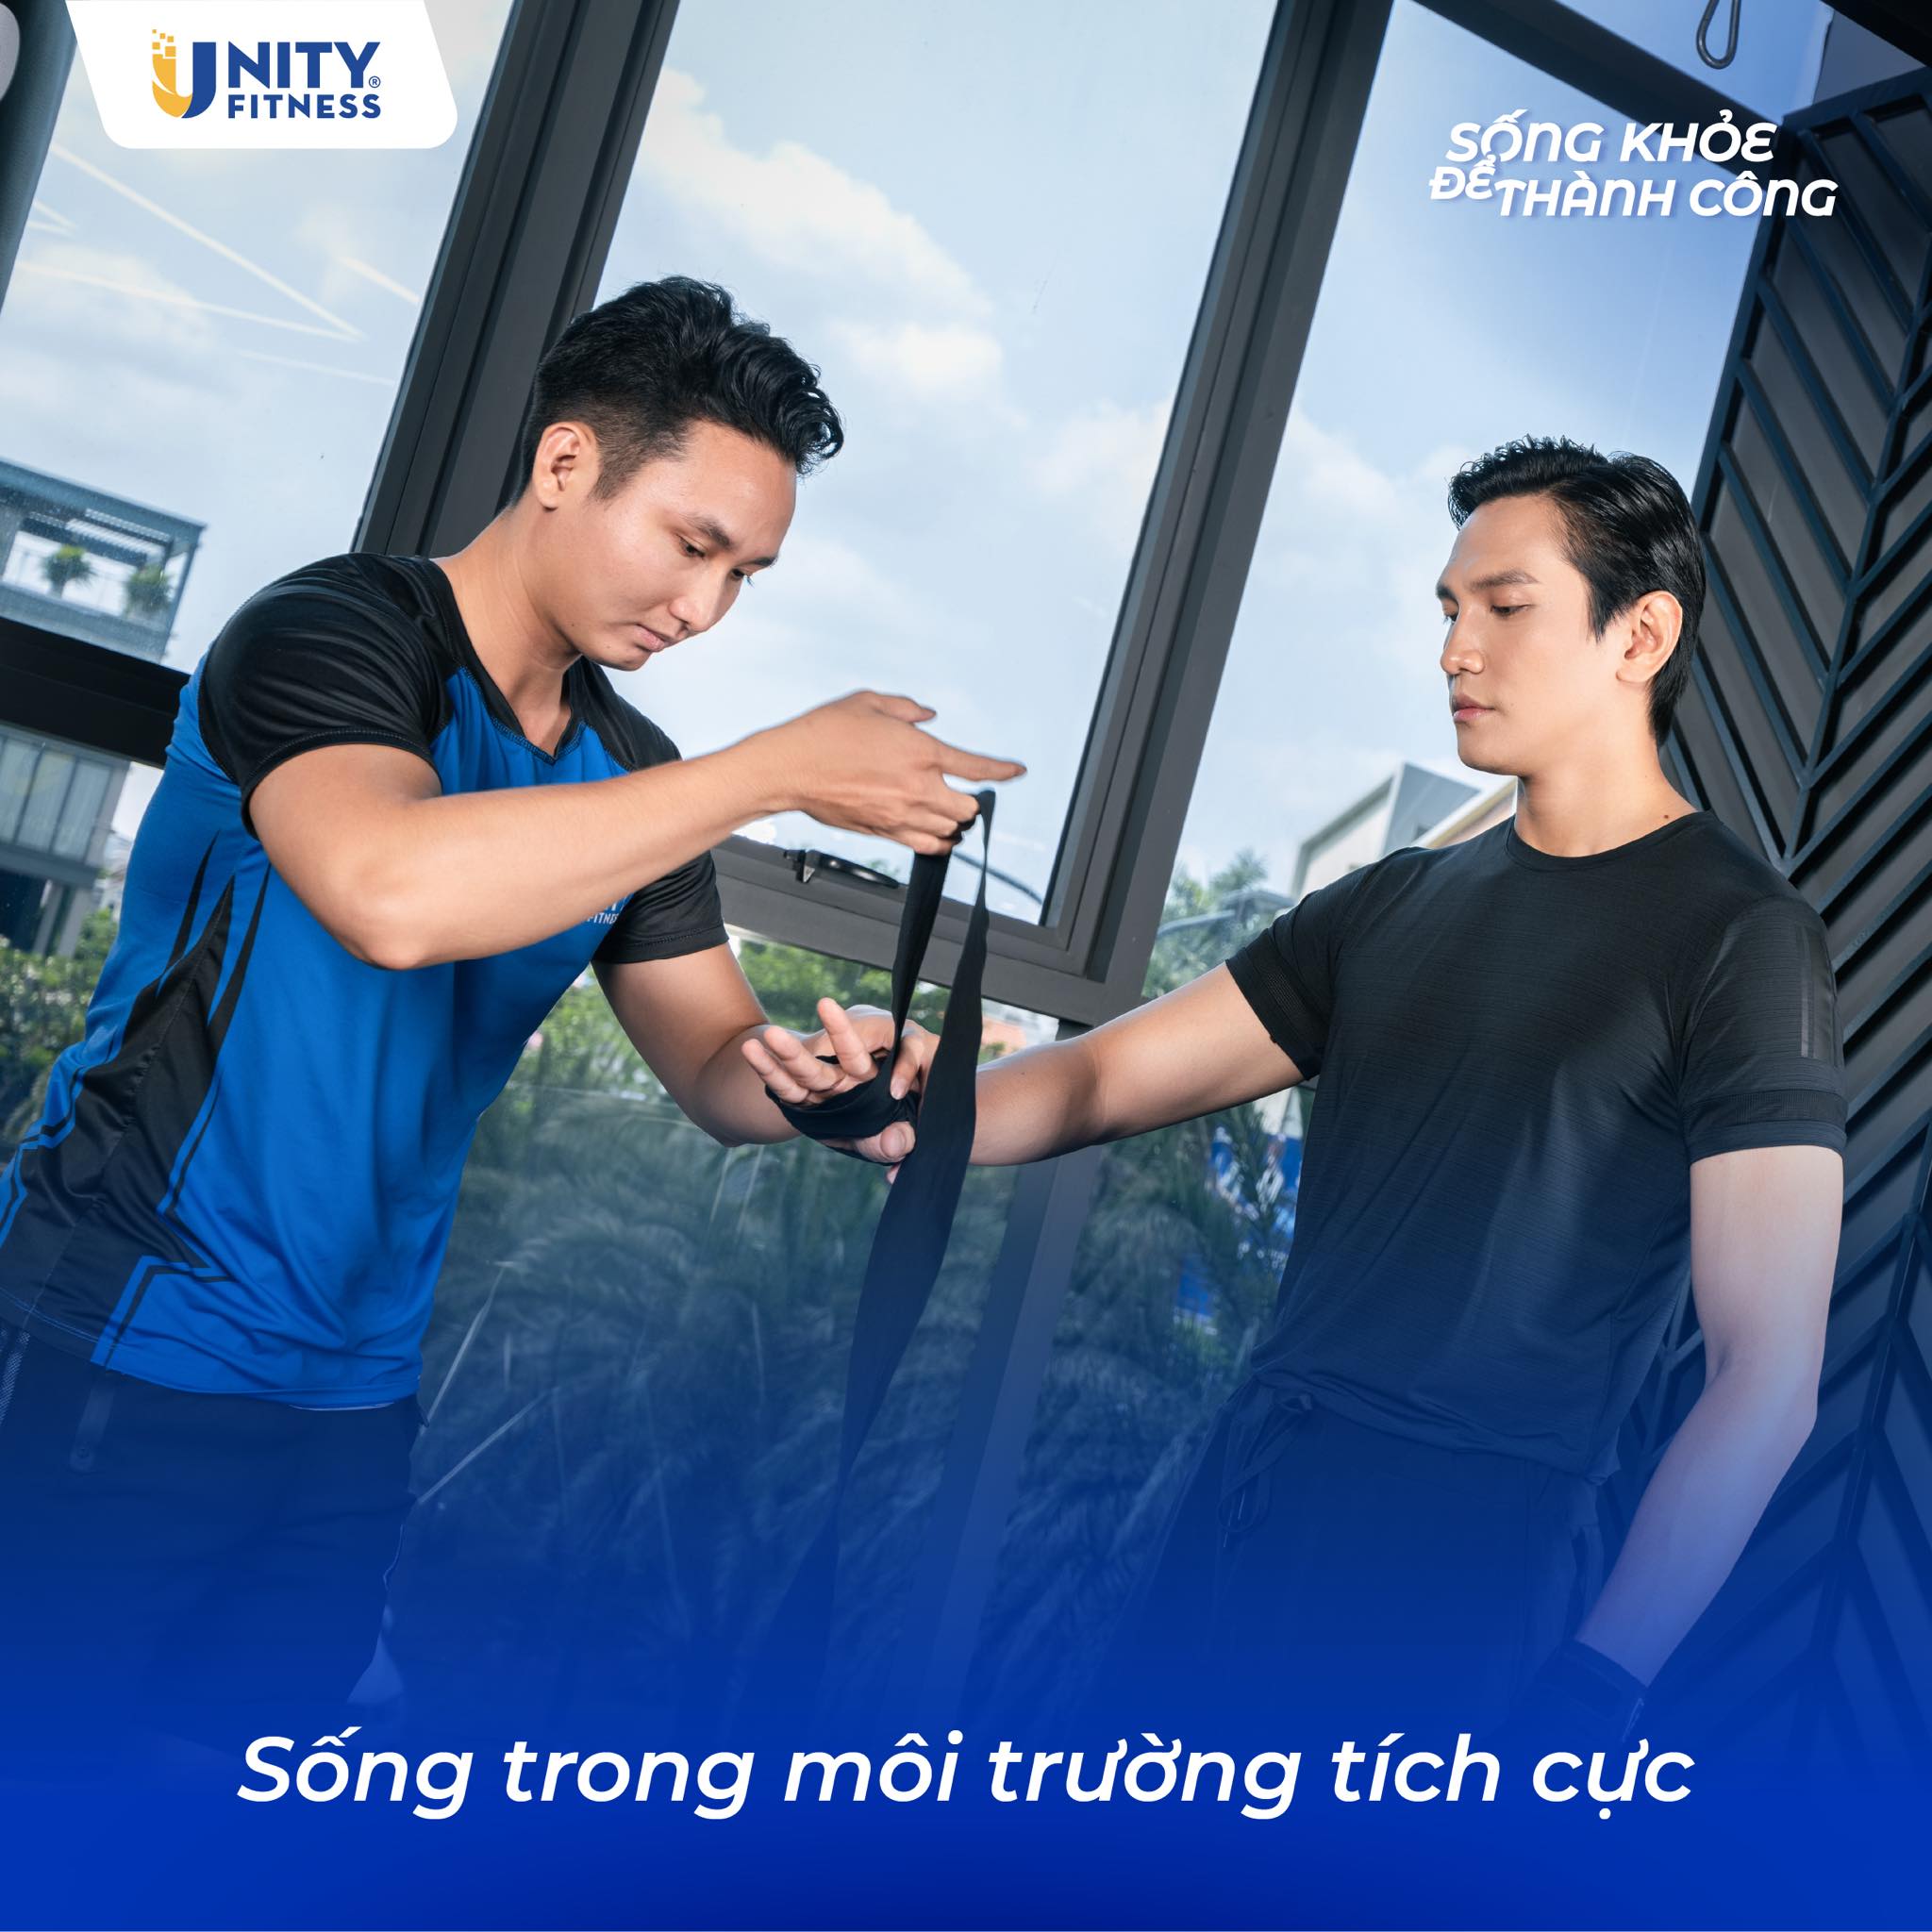 phong tap unity fitness11 1